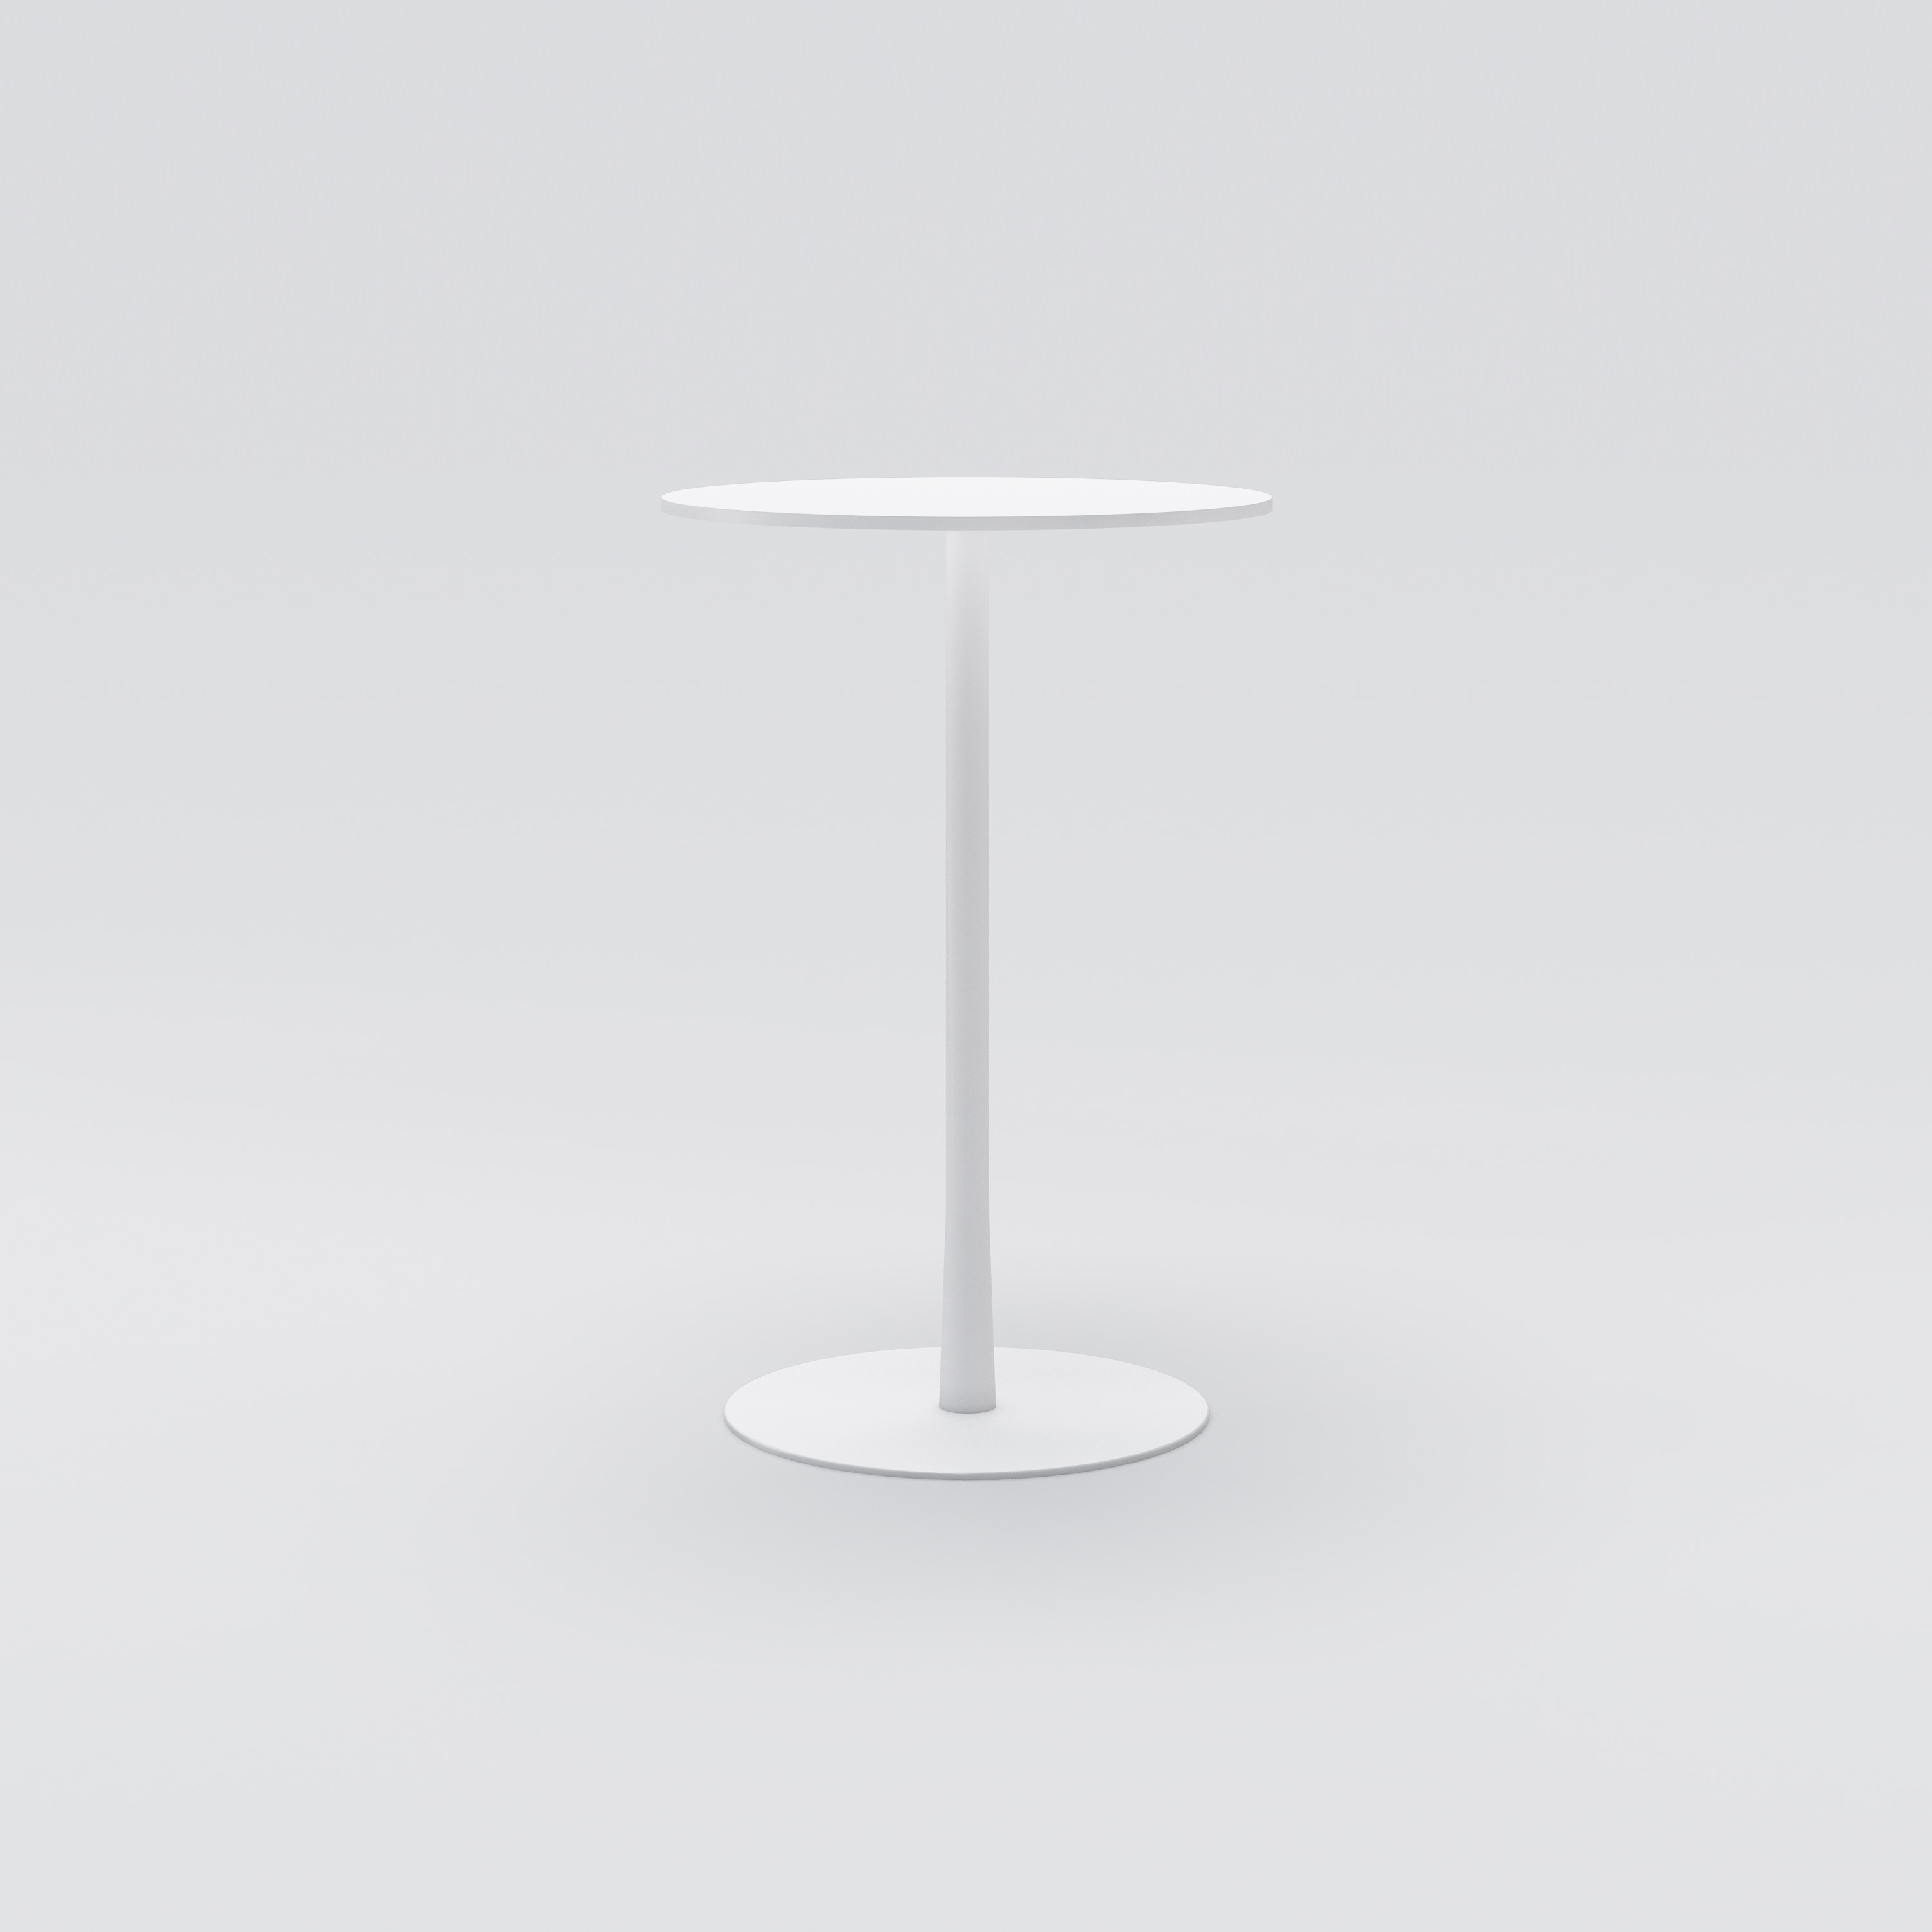 Caf&#233; Table Cone, &#216;700, H1060, White HPL, White